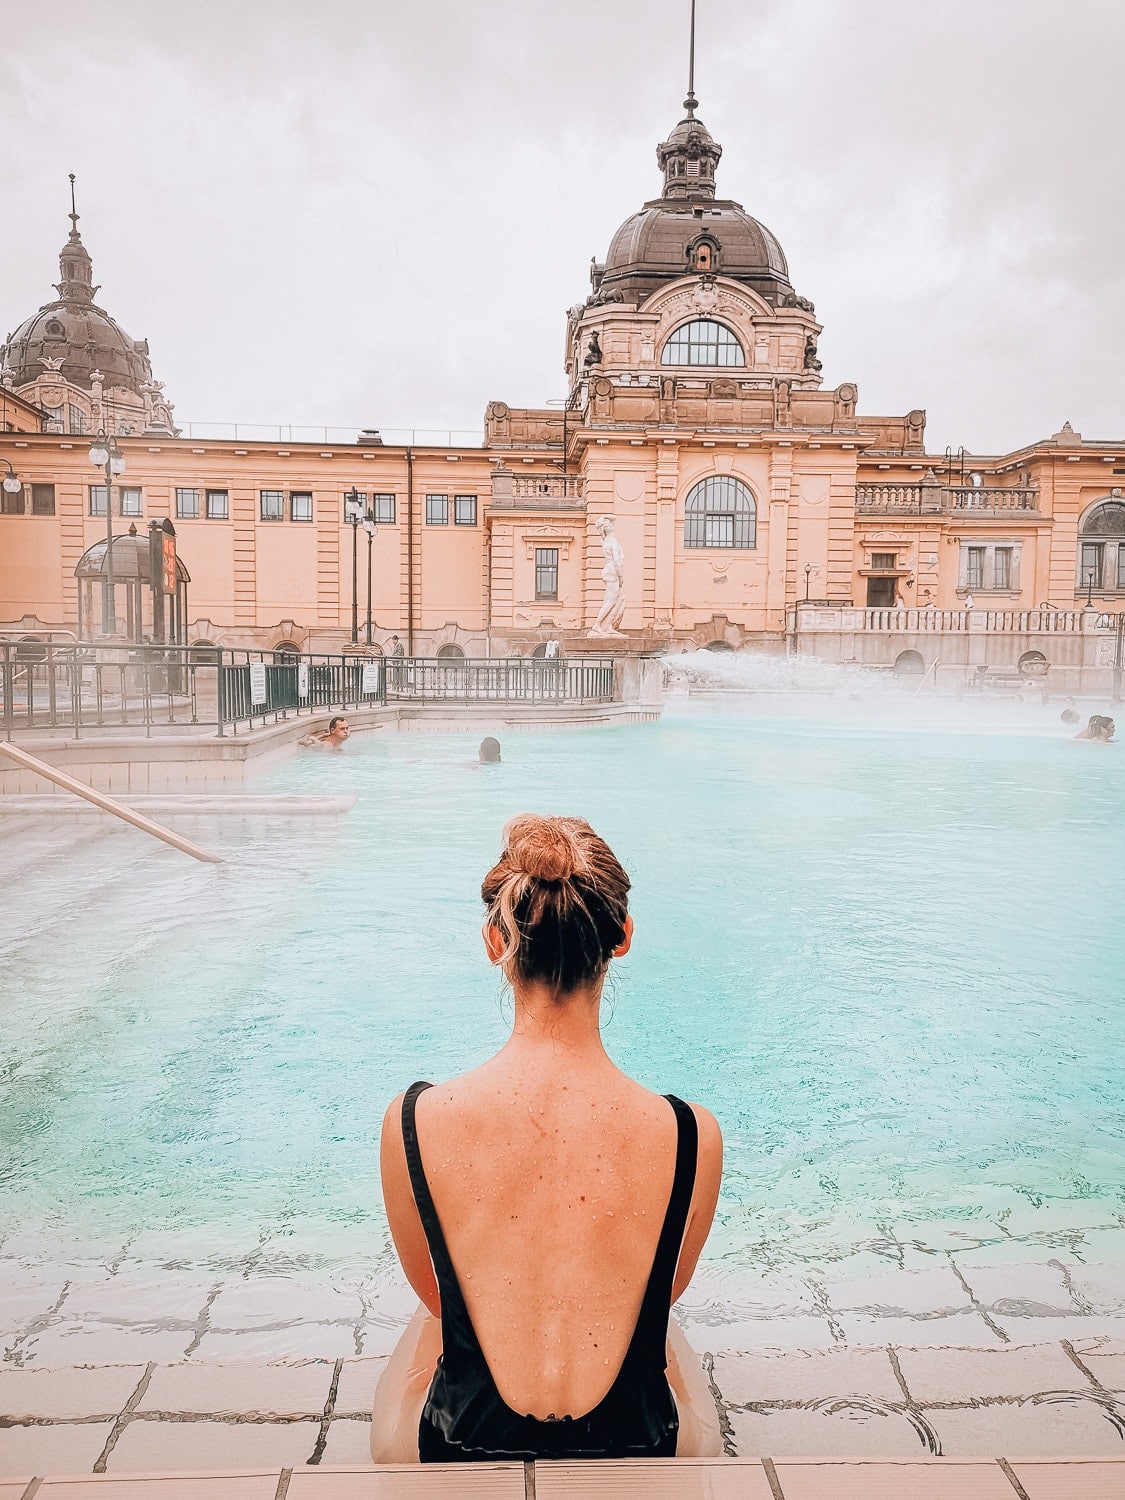 Things to see in Budapest Szecheney Spa